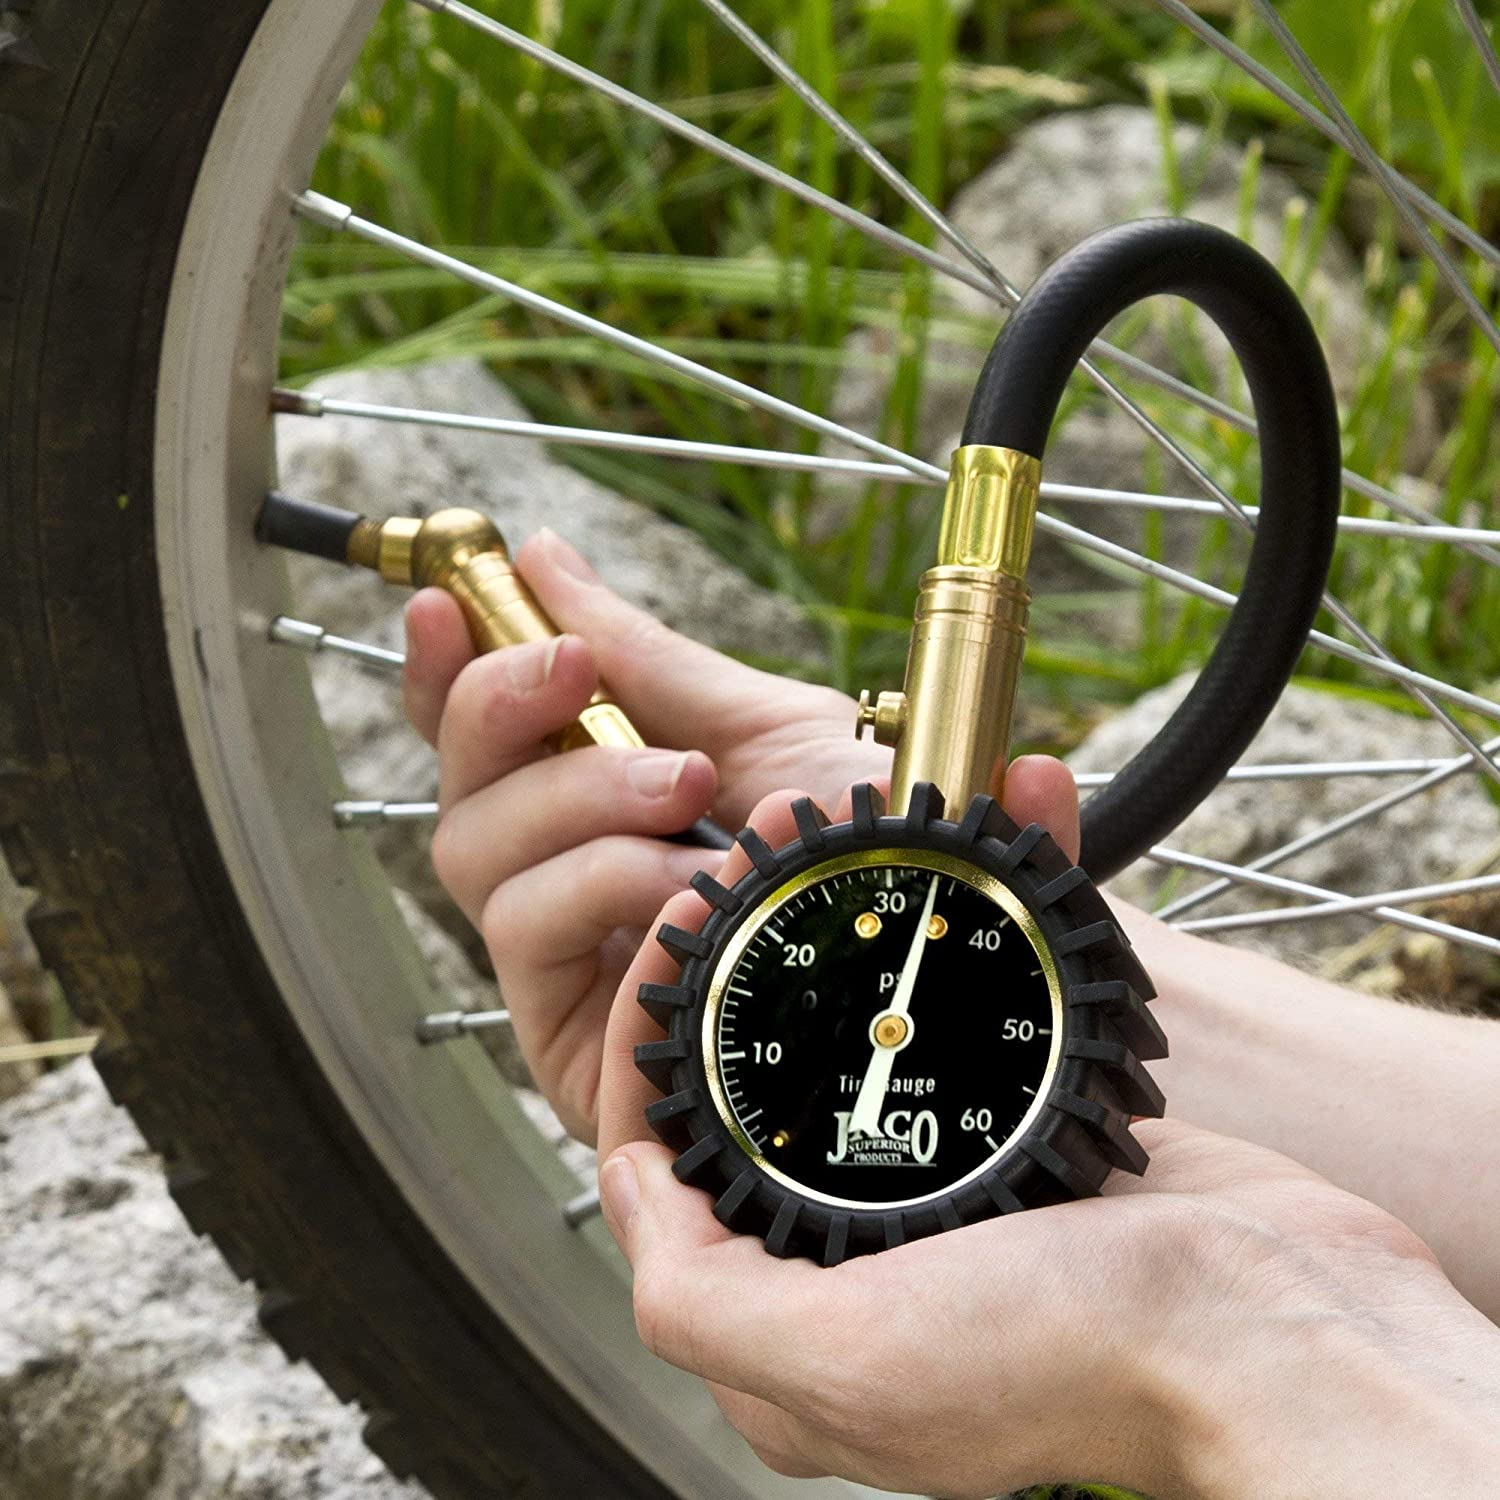 It is a great idea to add a pressure gauge to your mountain bike tool bag so that you can monitor the pressure of your tires. 